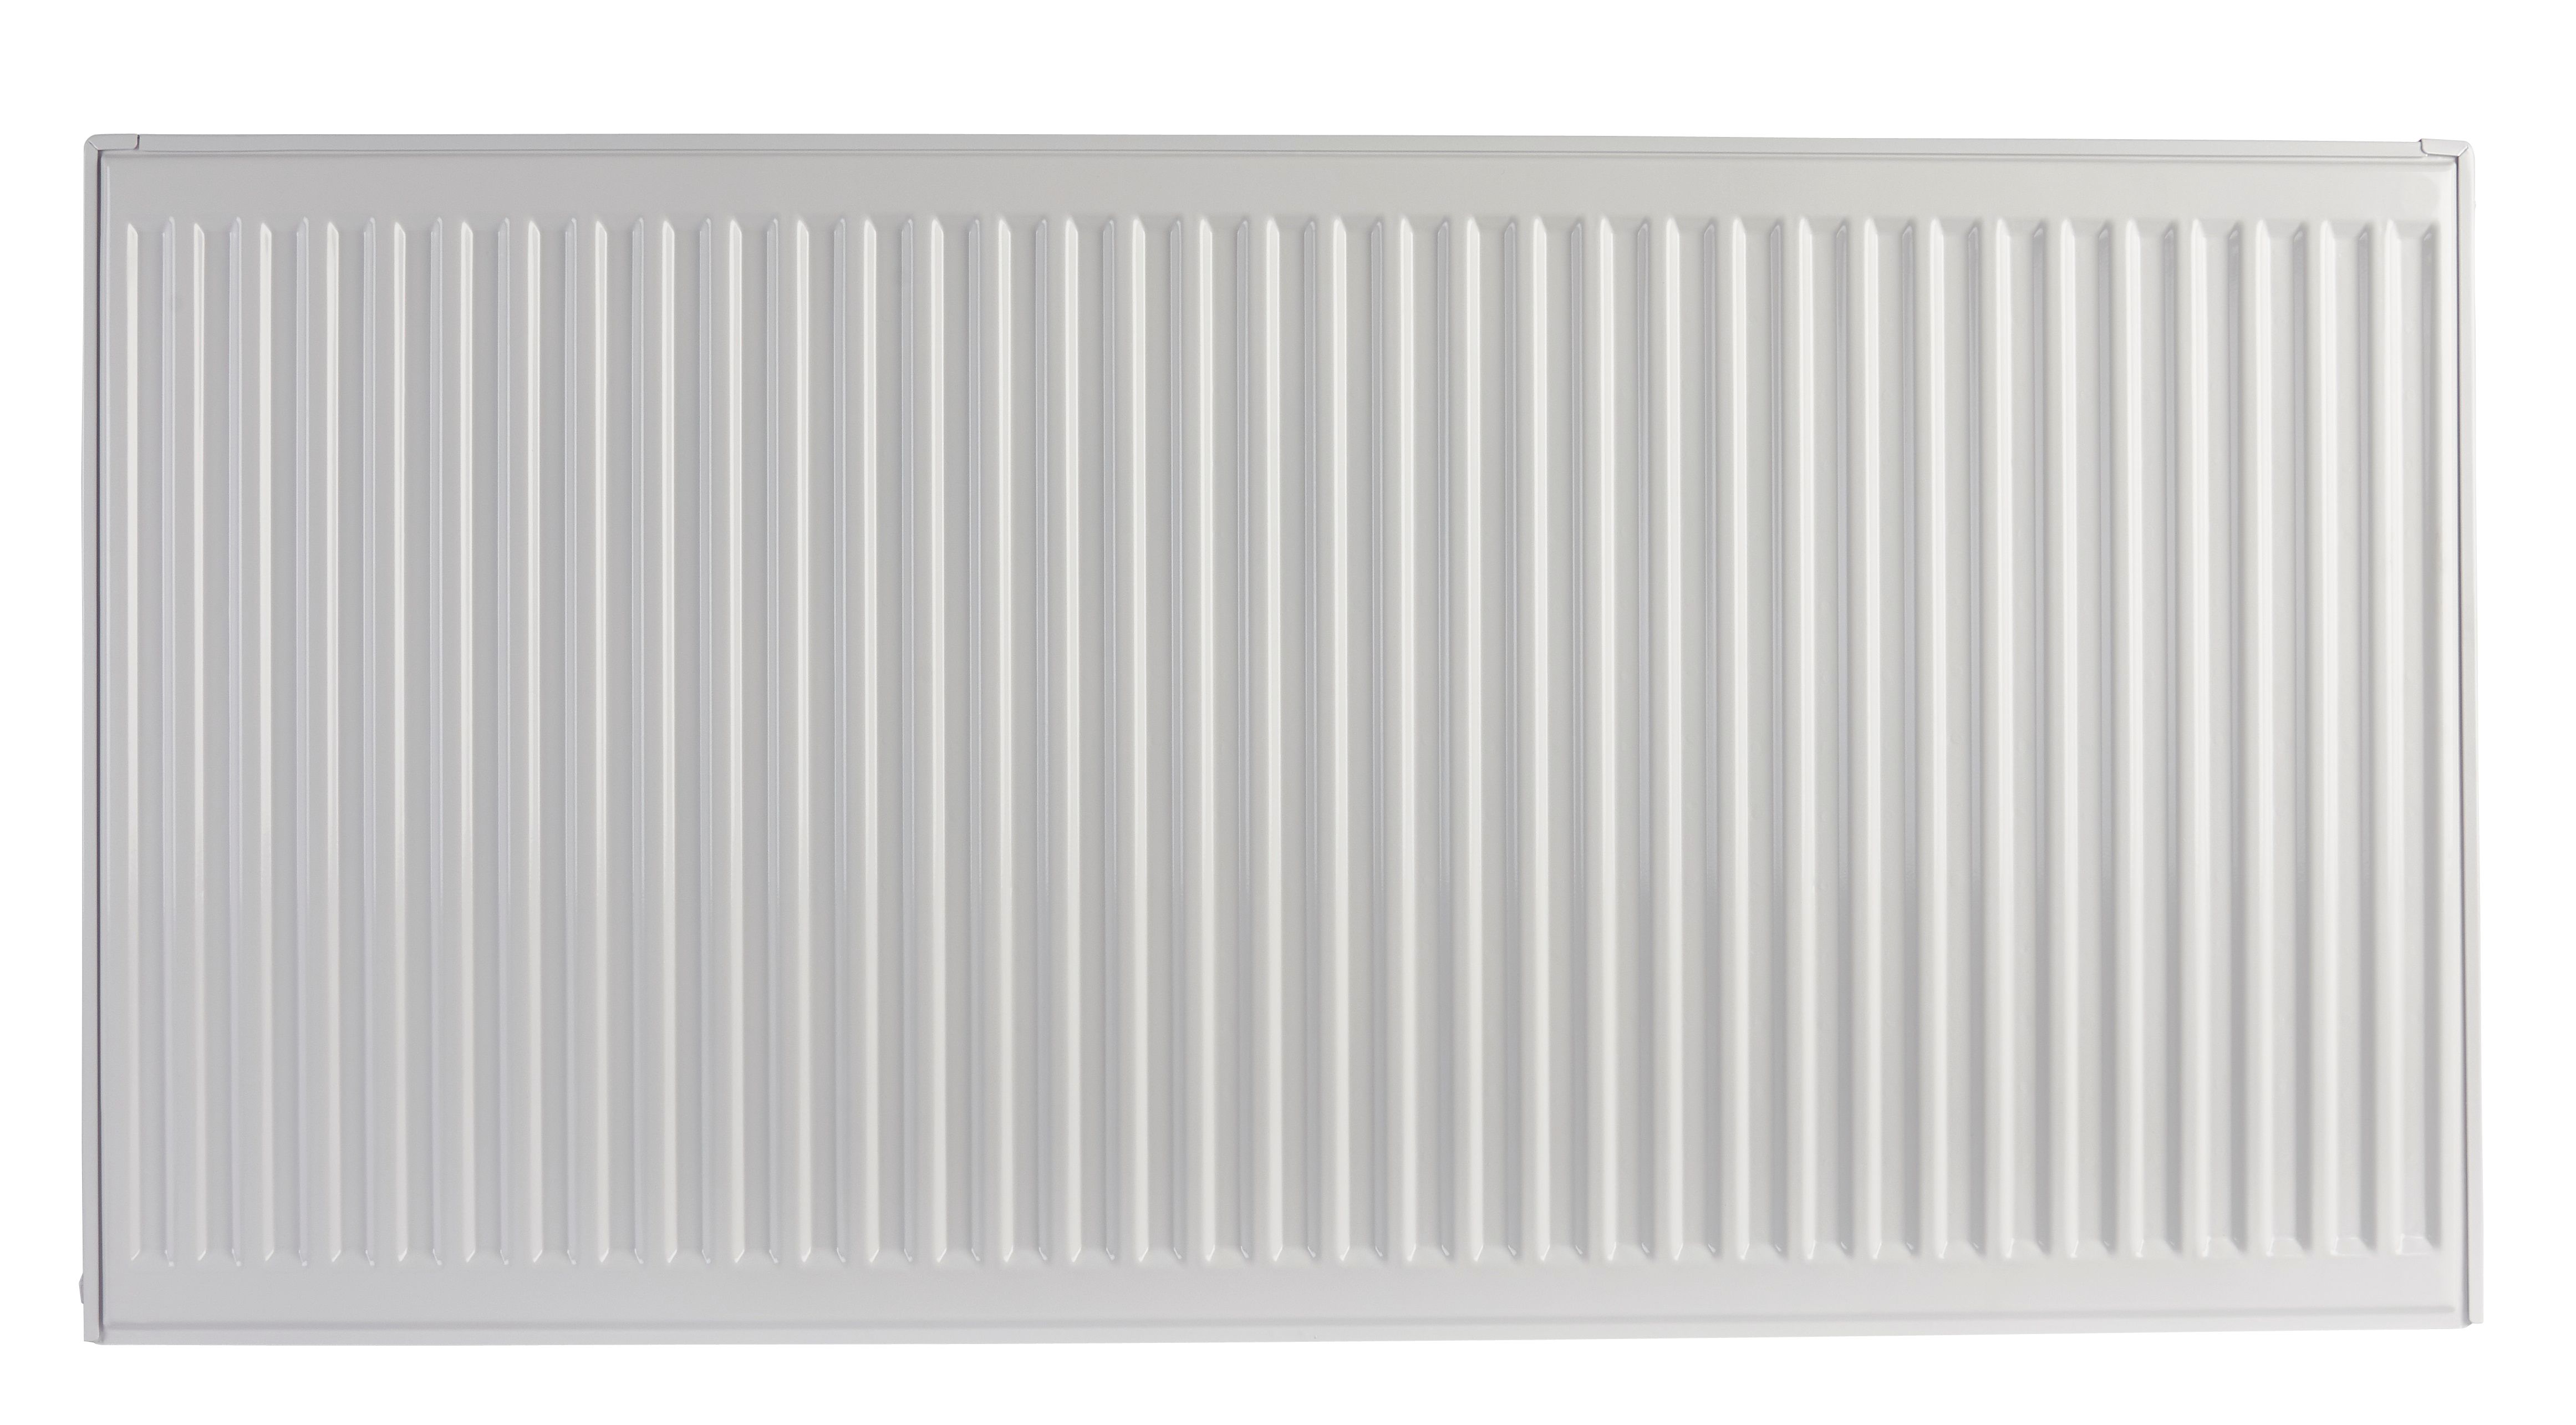 Image of Homeline by Stelrad 600 x 1600mm Type 21 Double Panel Plus Single Convector Radiator